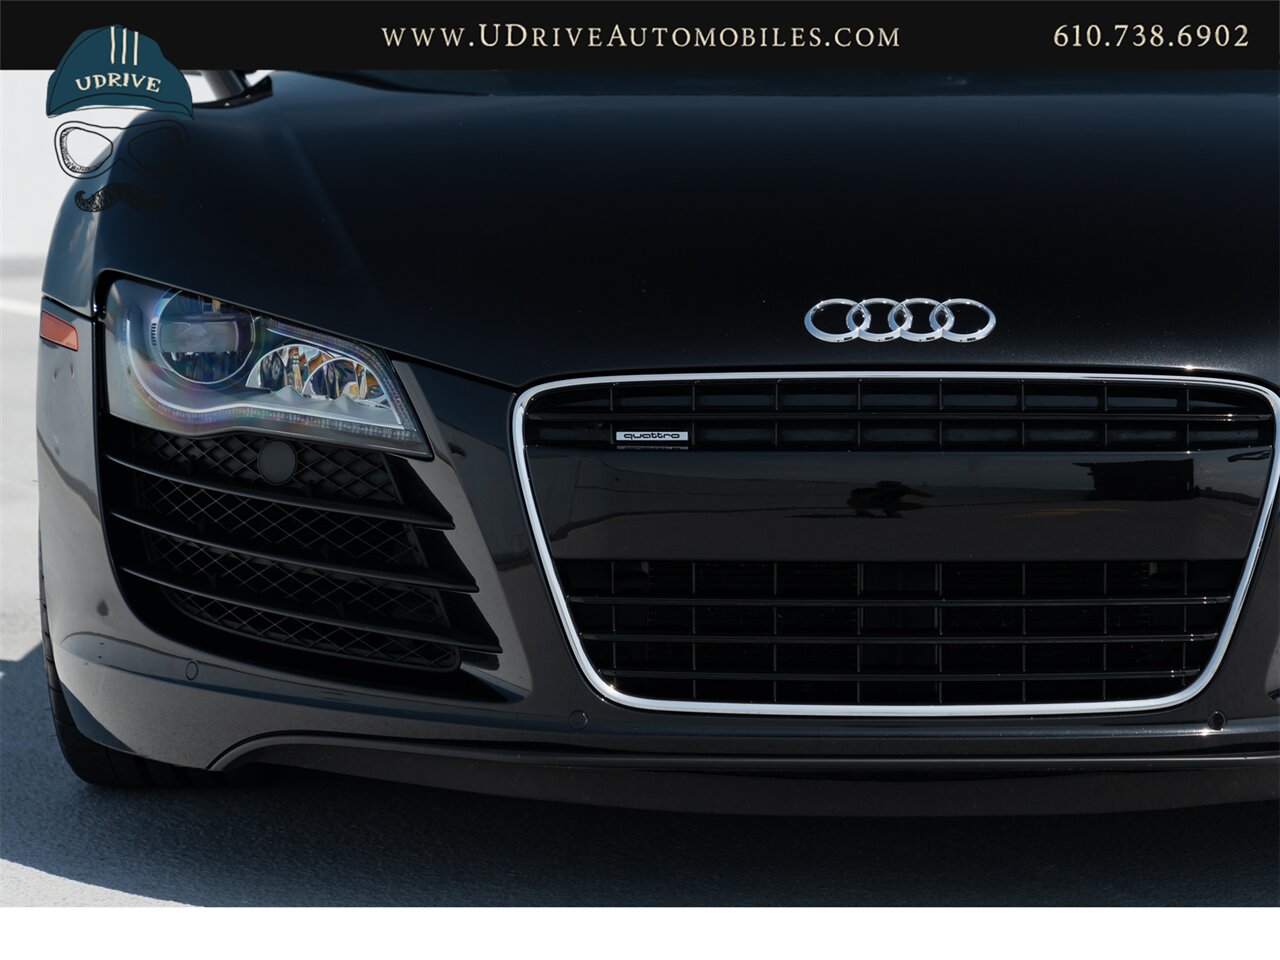 2012 Audi R8 4.2 Quattro  6 Speed Manual 1 Owner Service History - Photo 14 - West Chester, PA 19382